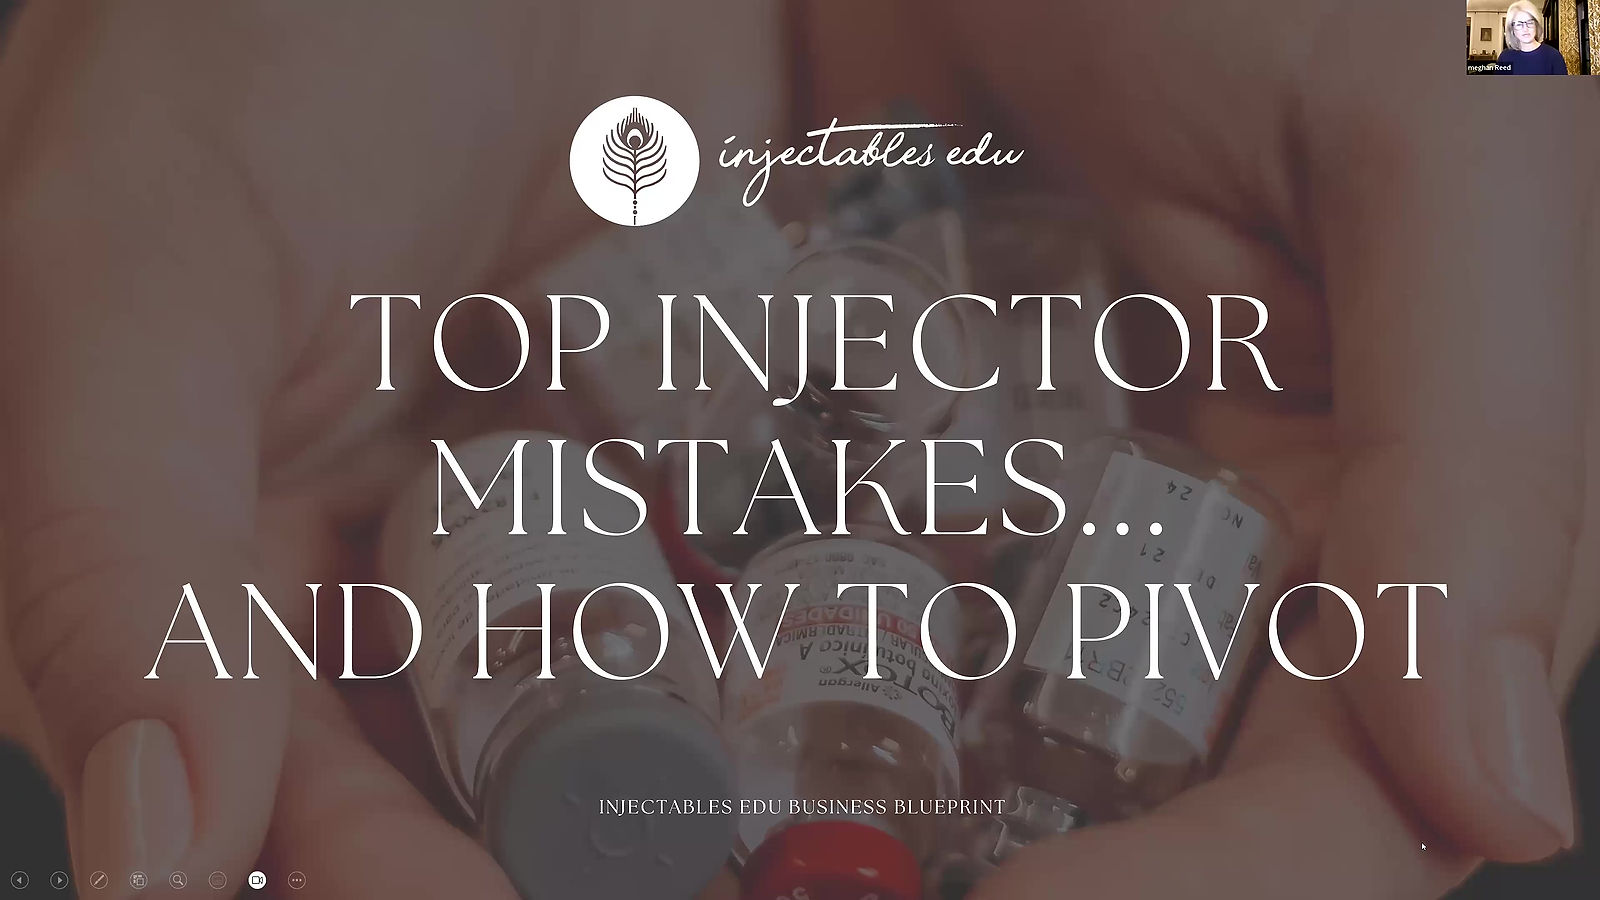 Top Injector Mistakes and How to Pivot